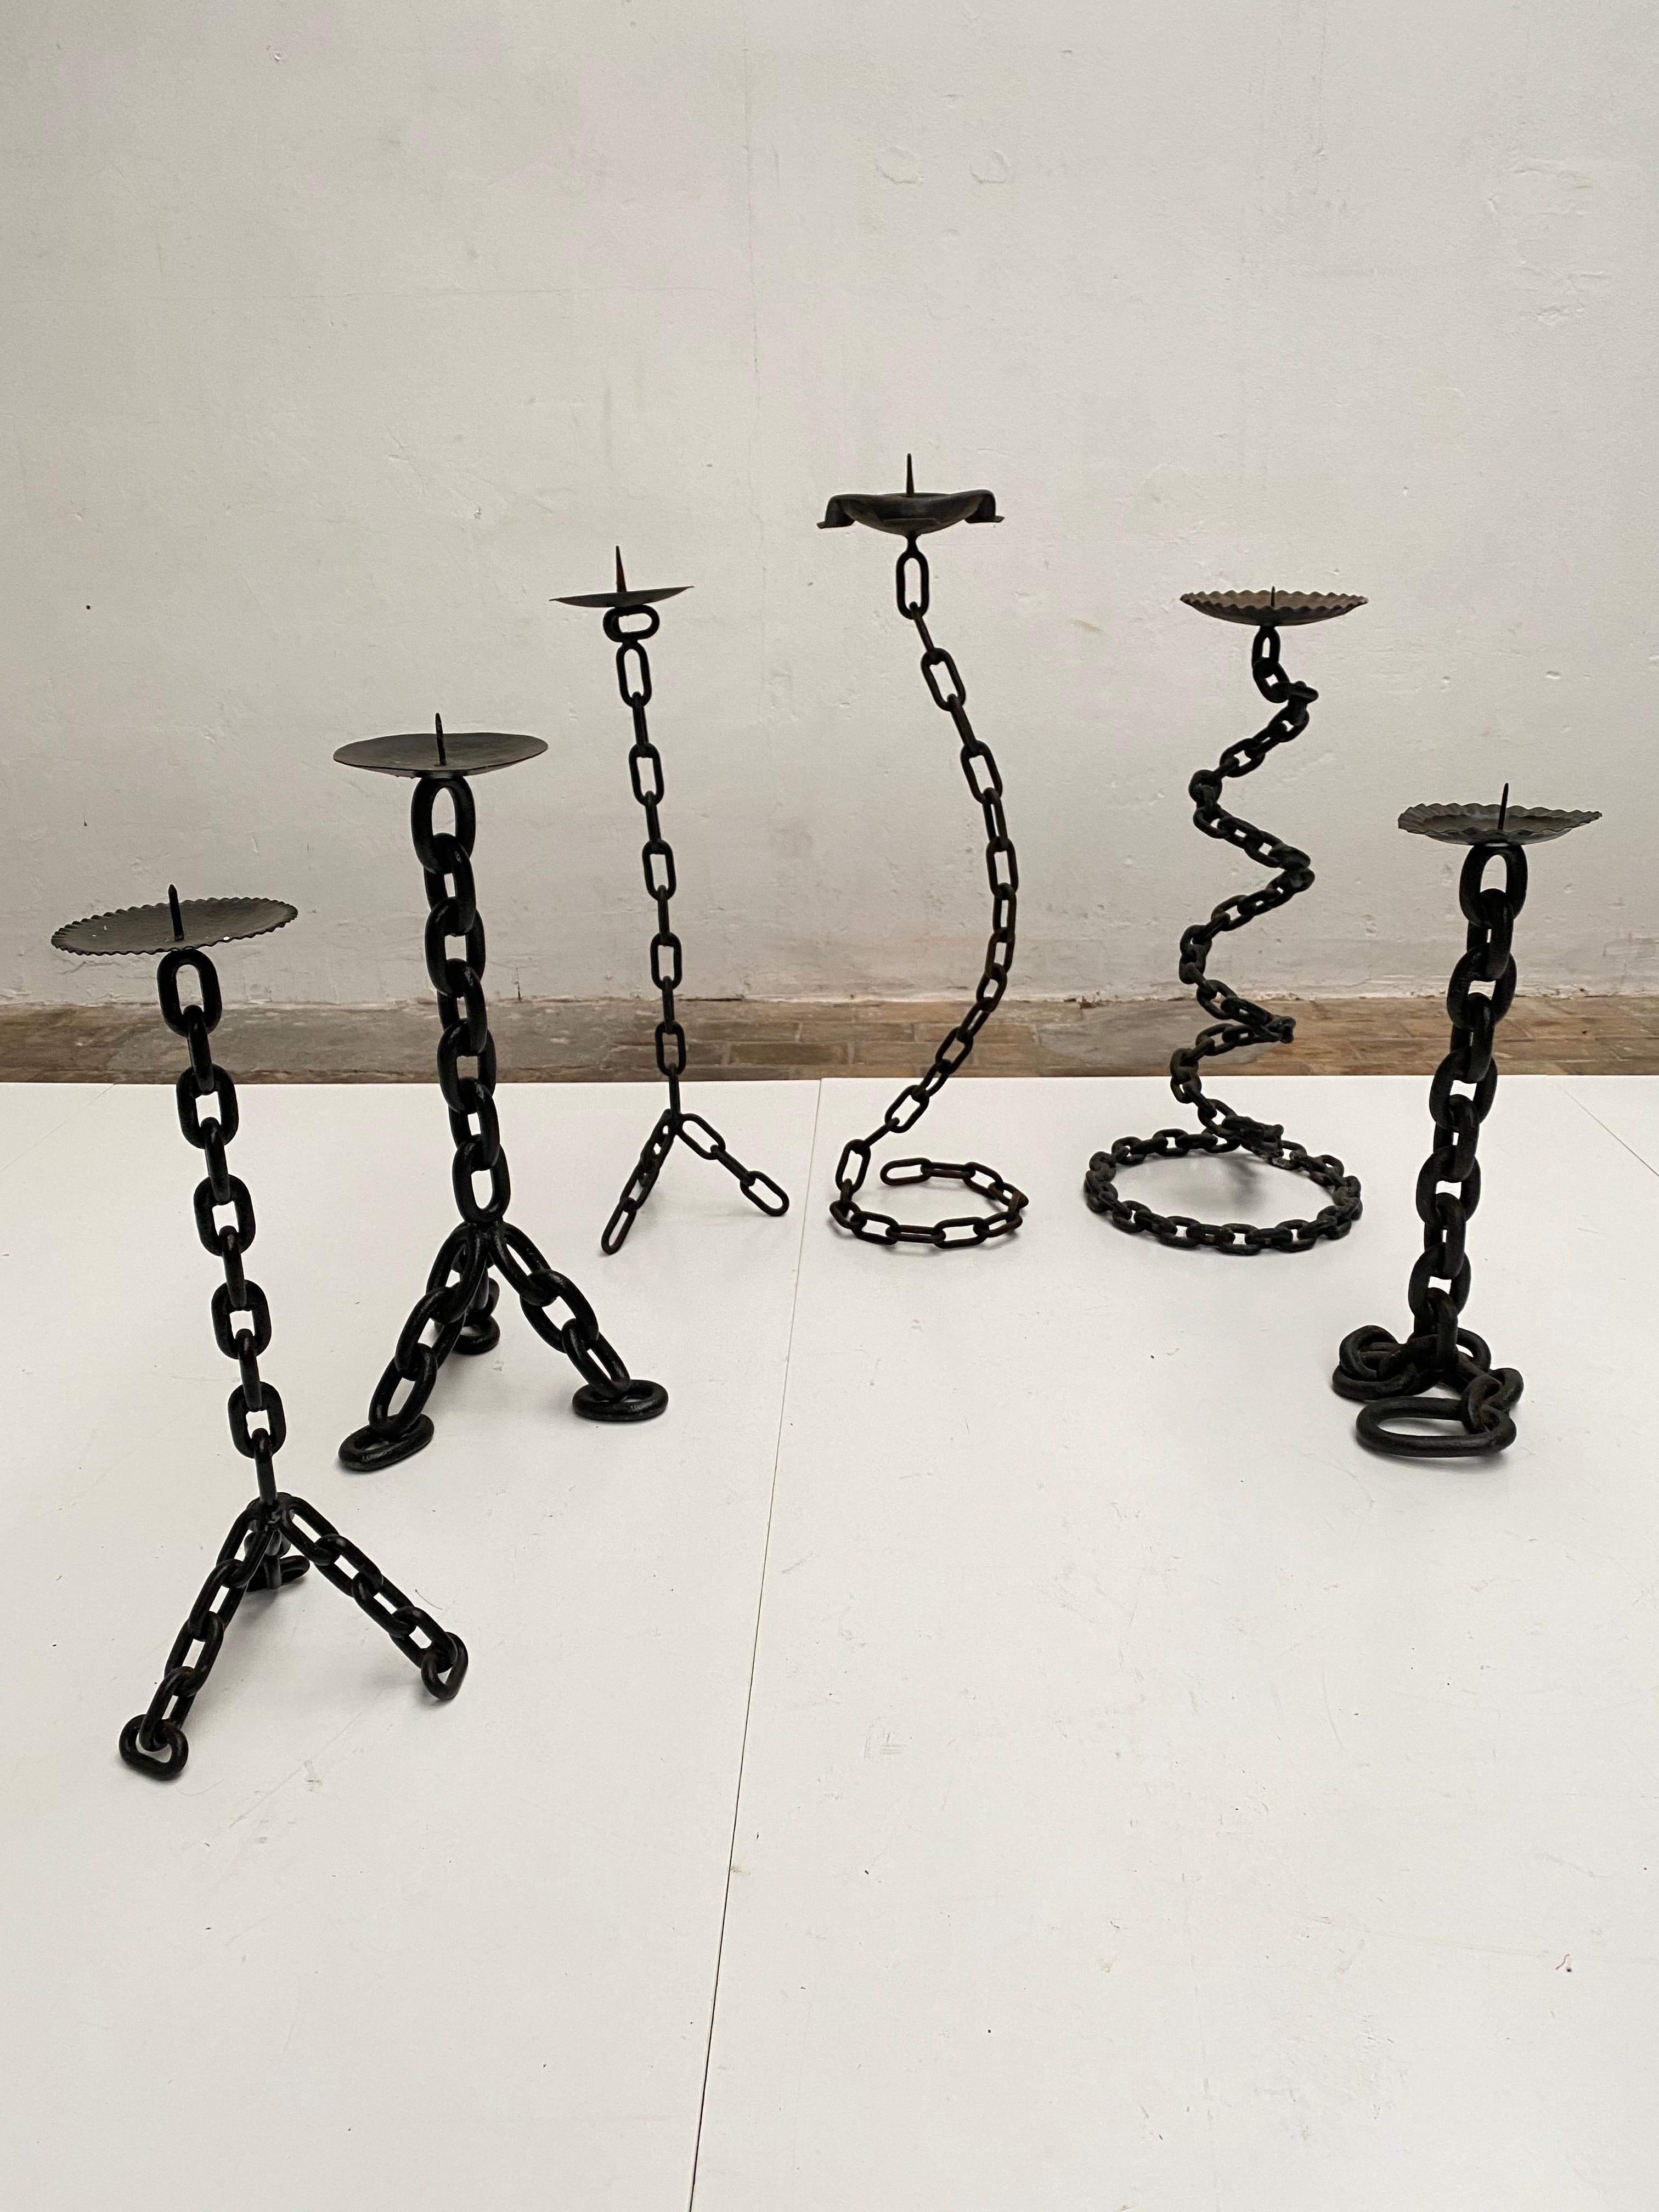 A collection of 6 impressive sized brutalist 1970s candleholders

Iron chains and wrought iron has been welded and forged by hand to make these brutalist forms 

The origin is from The Netherlands where in the 1970s this brutalist style was in